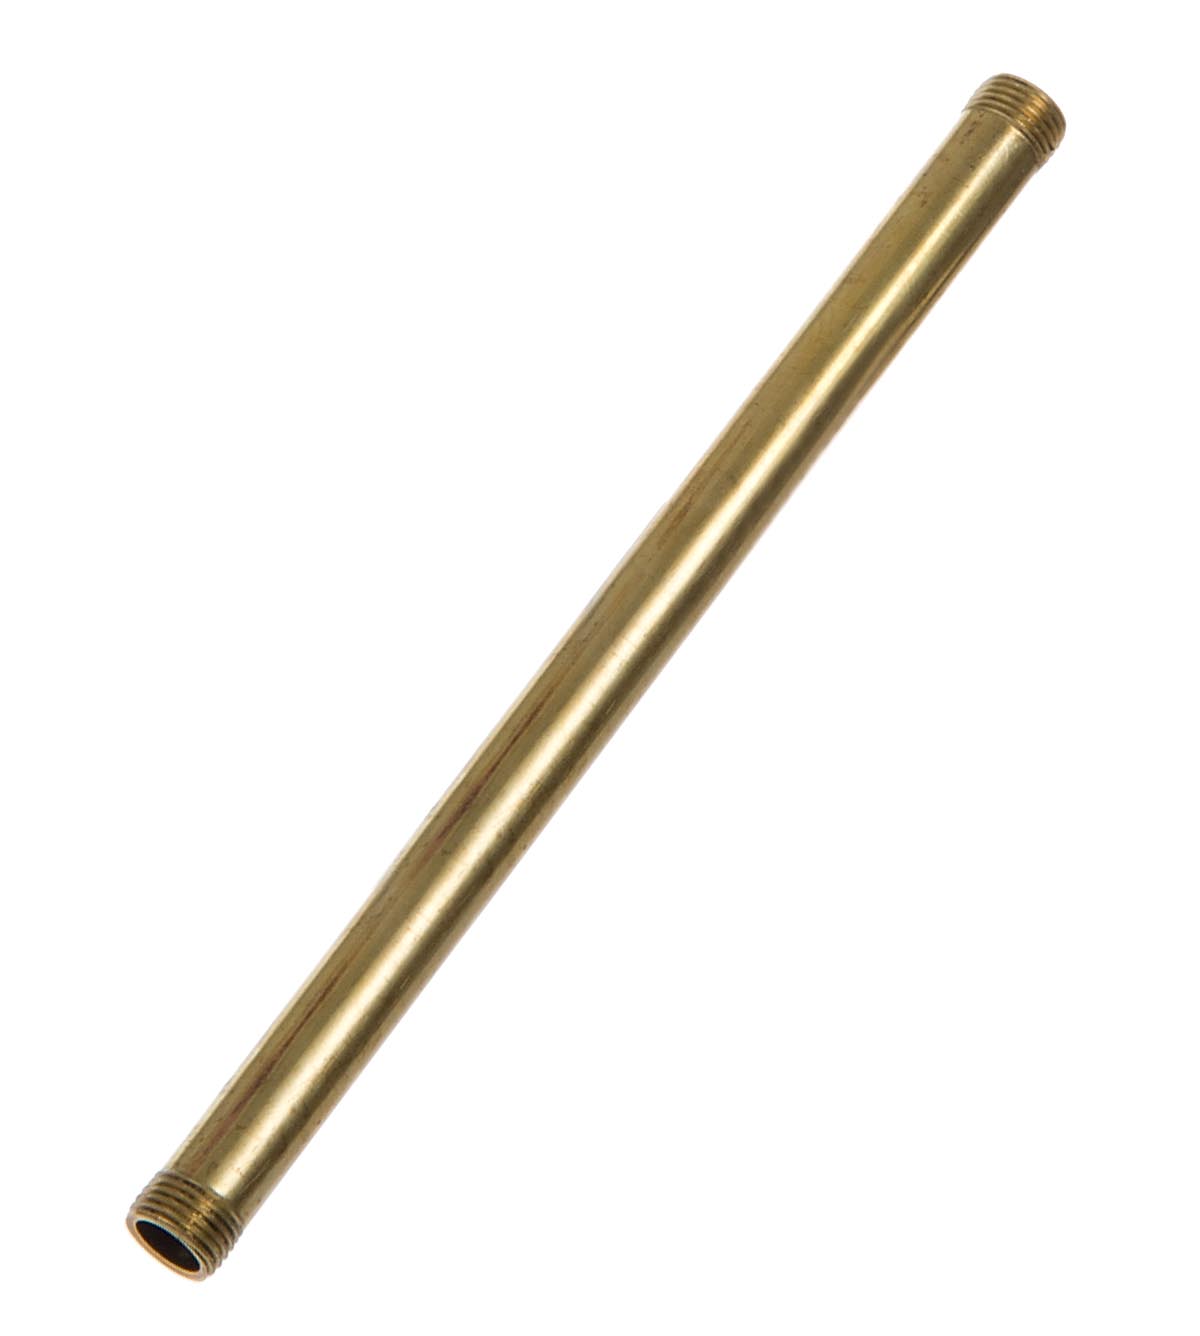 1" Long, Brass Fixture Stem Lamp Pipe, Both Ends Threaded 1/8 IPS X 3/16"